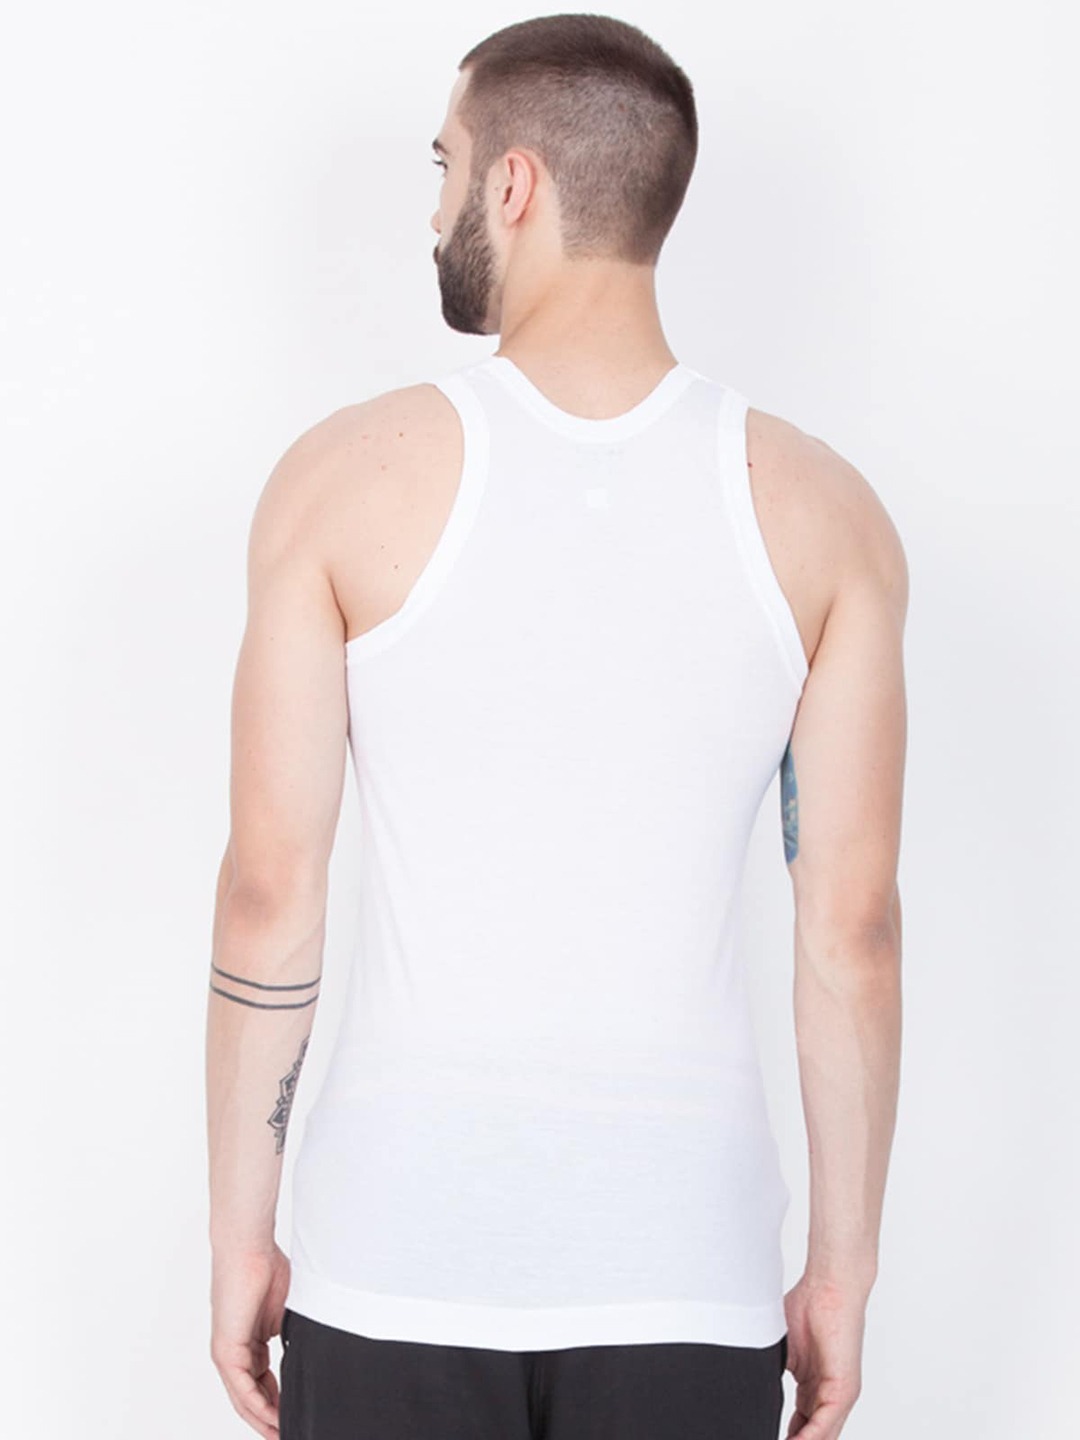 Clothing Innerwear Vests | Lux Cozi Men Pack Of 3 Pure Cotton Basic Innerwear Vest - QF05865